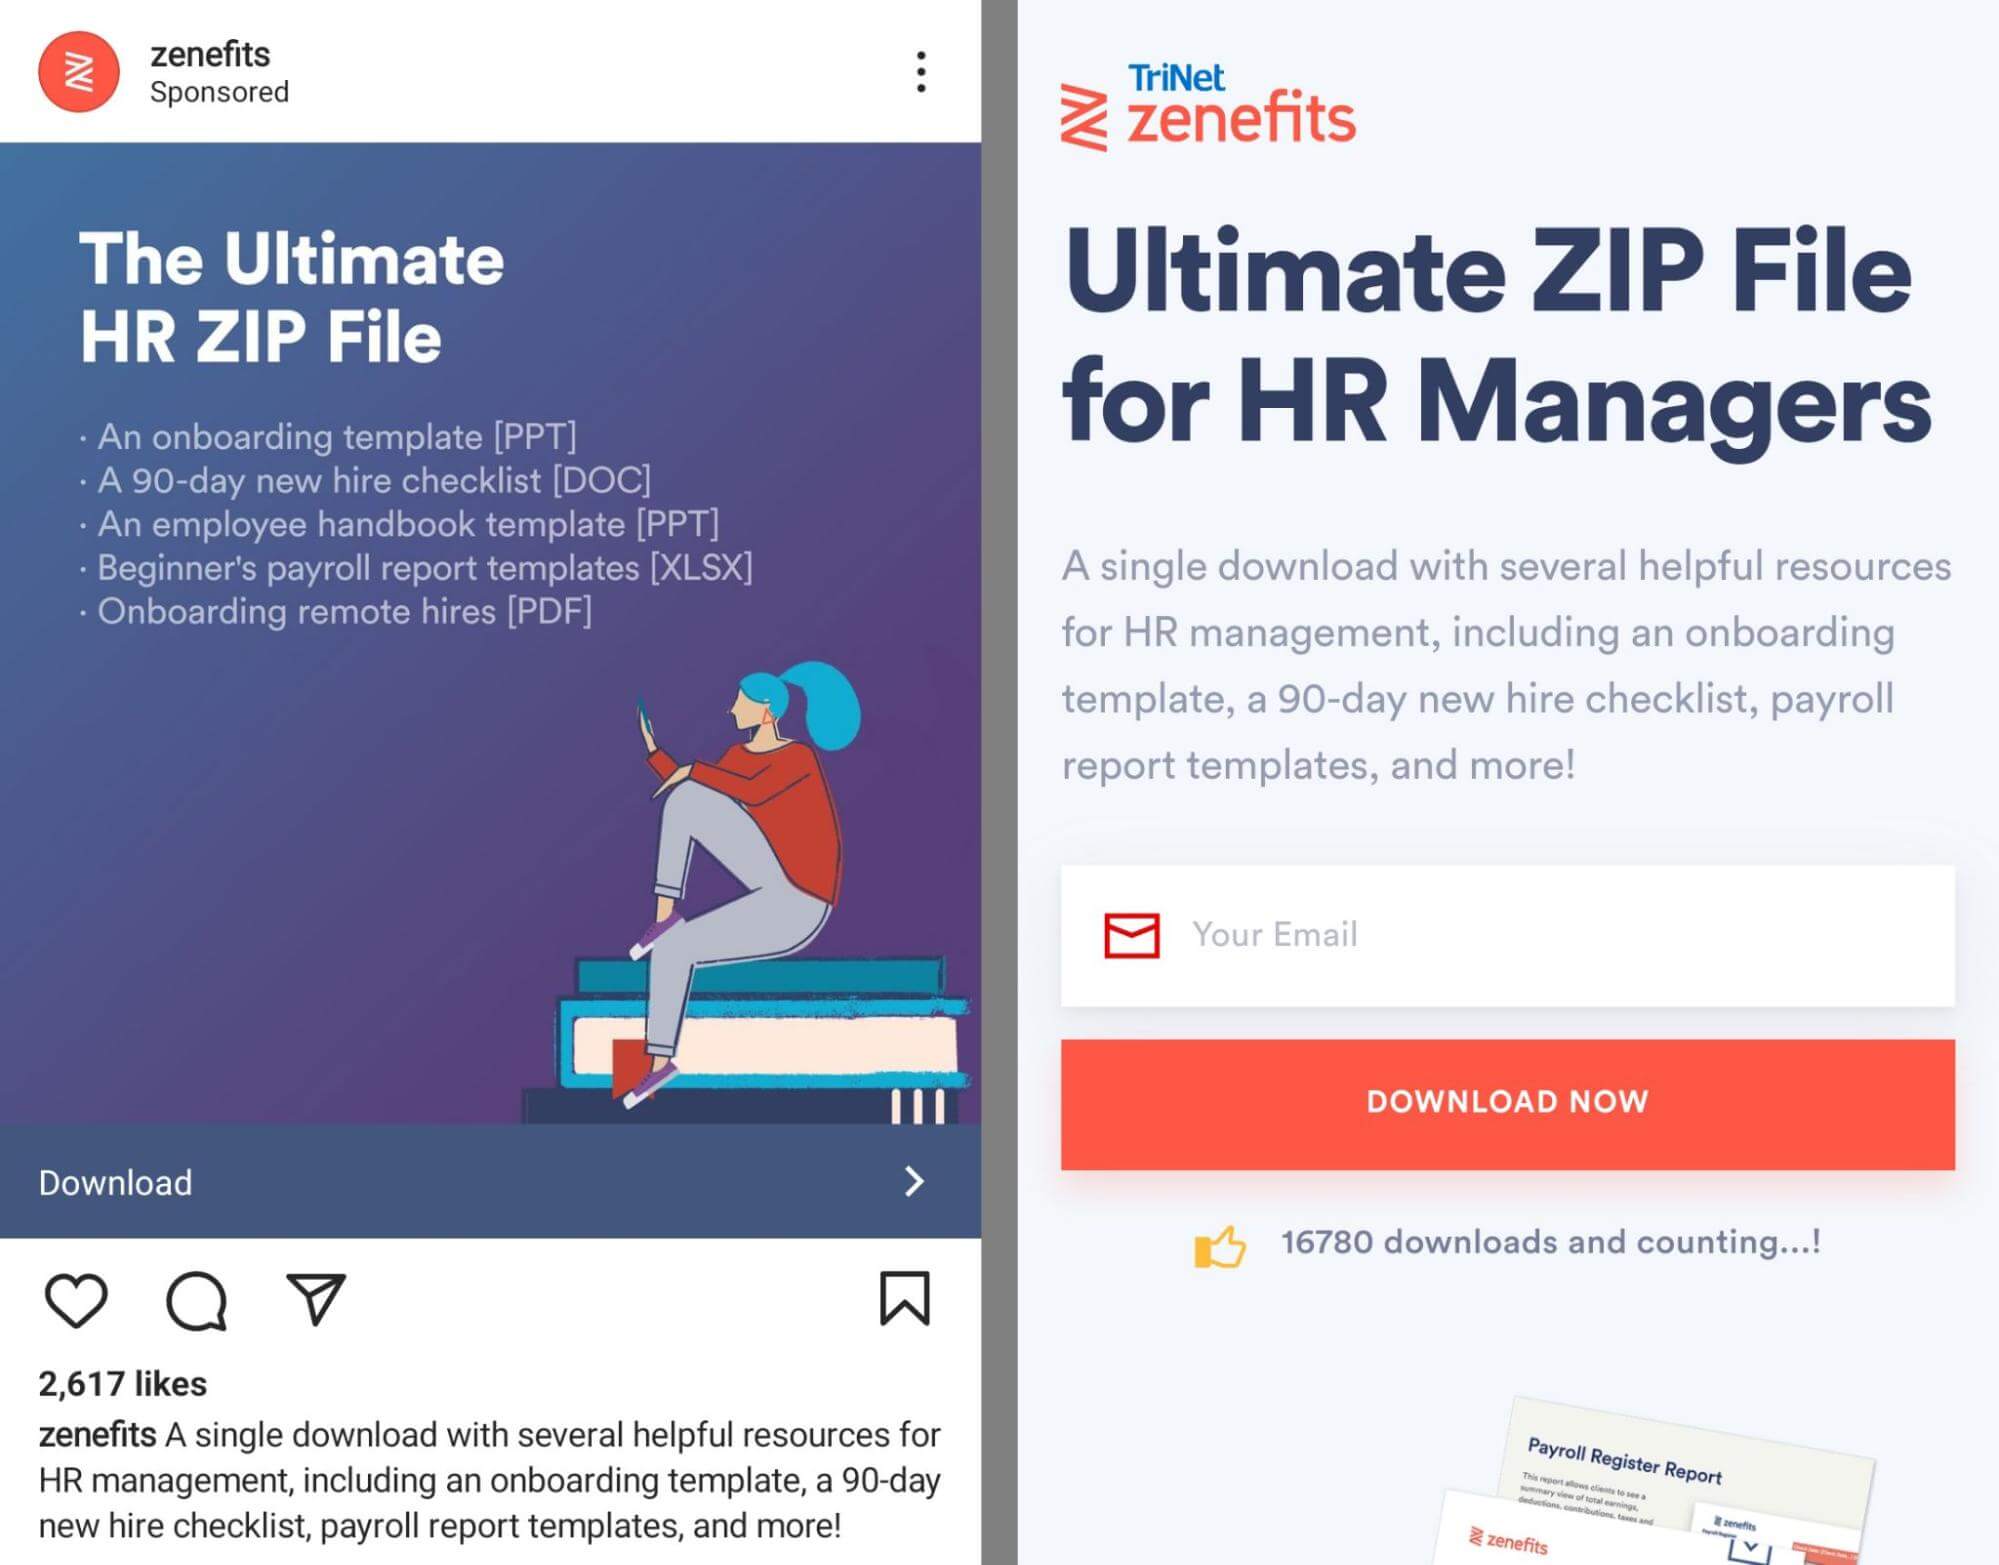 how-to-grow-your-email-list-on-instagram-using-instagram-landing-page-promotes-customer-email-download-cta-call-to-action-automatically-redirects-to-landing-page-zenefits-example-17